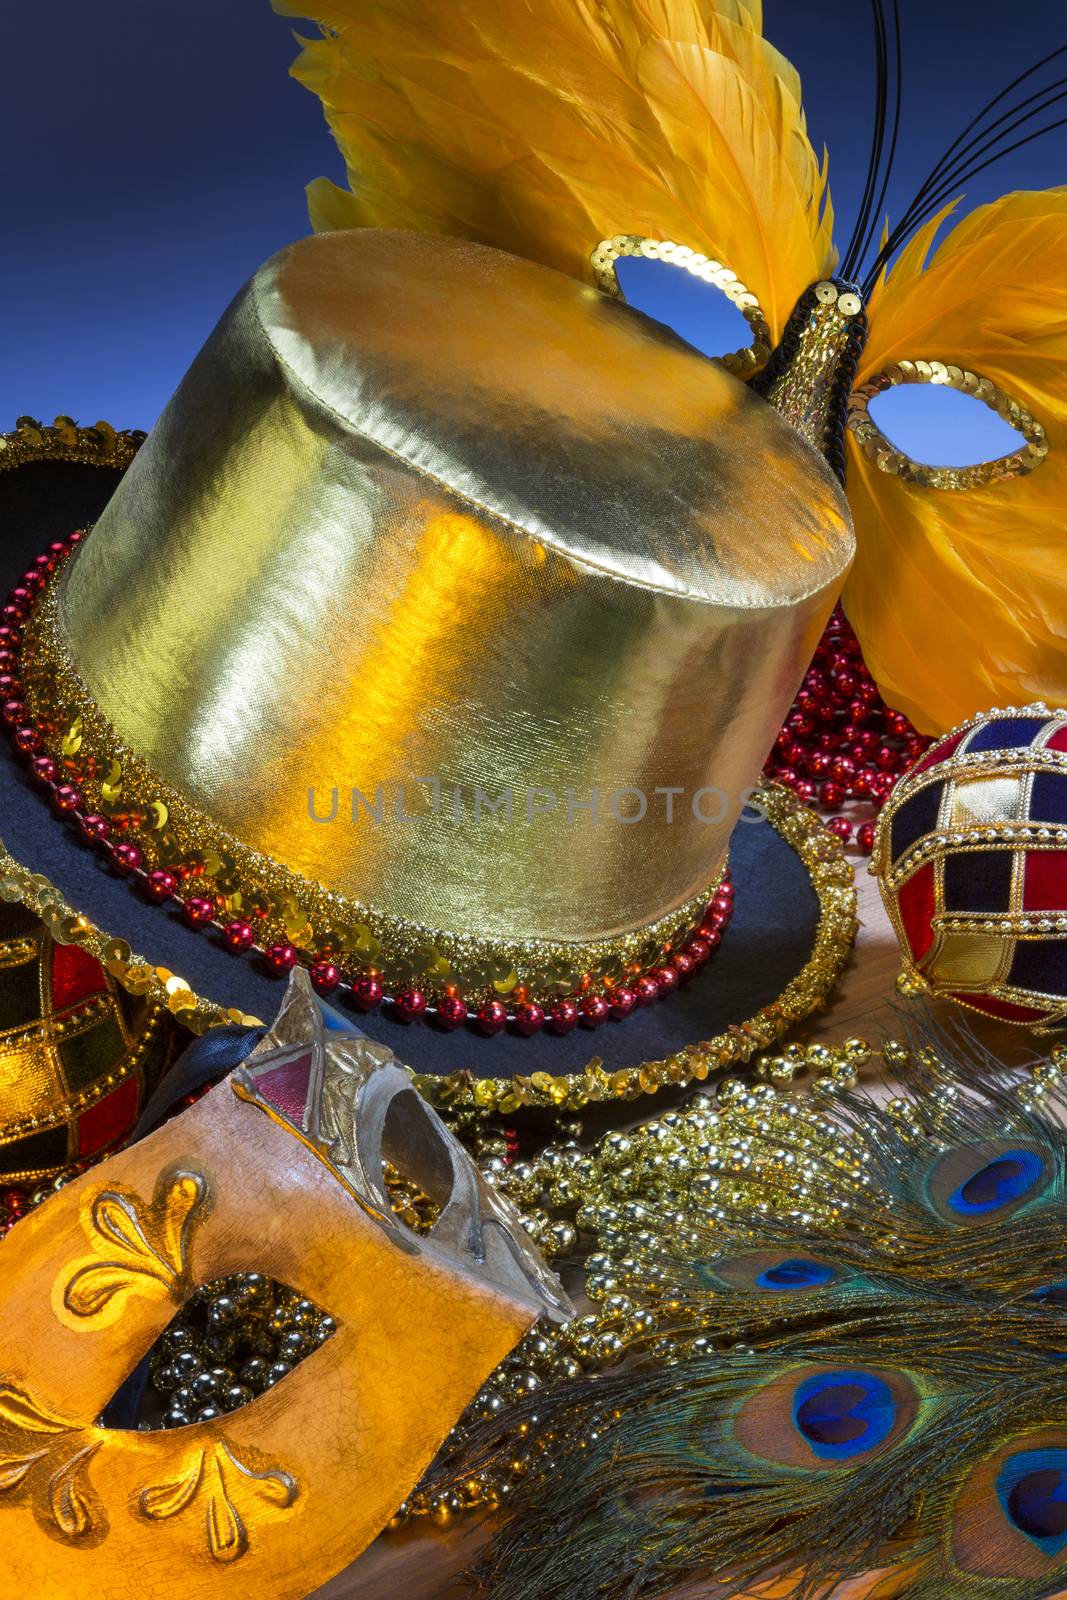 New Orleans Mardi Gras - Hat, masks and beads